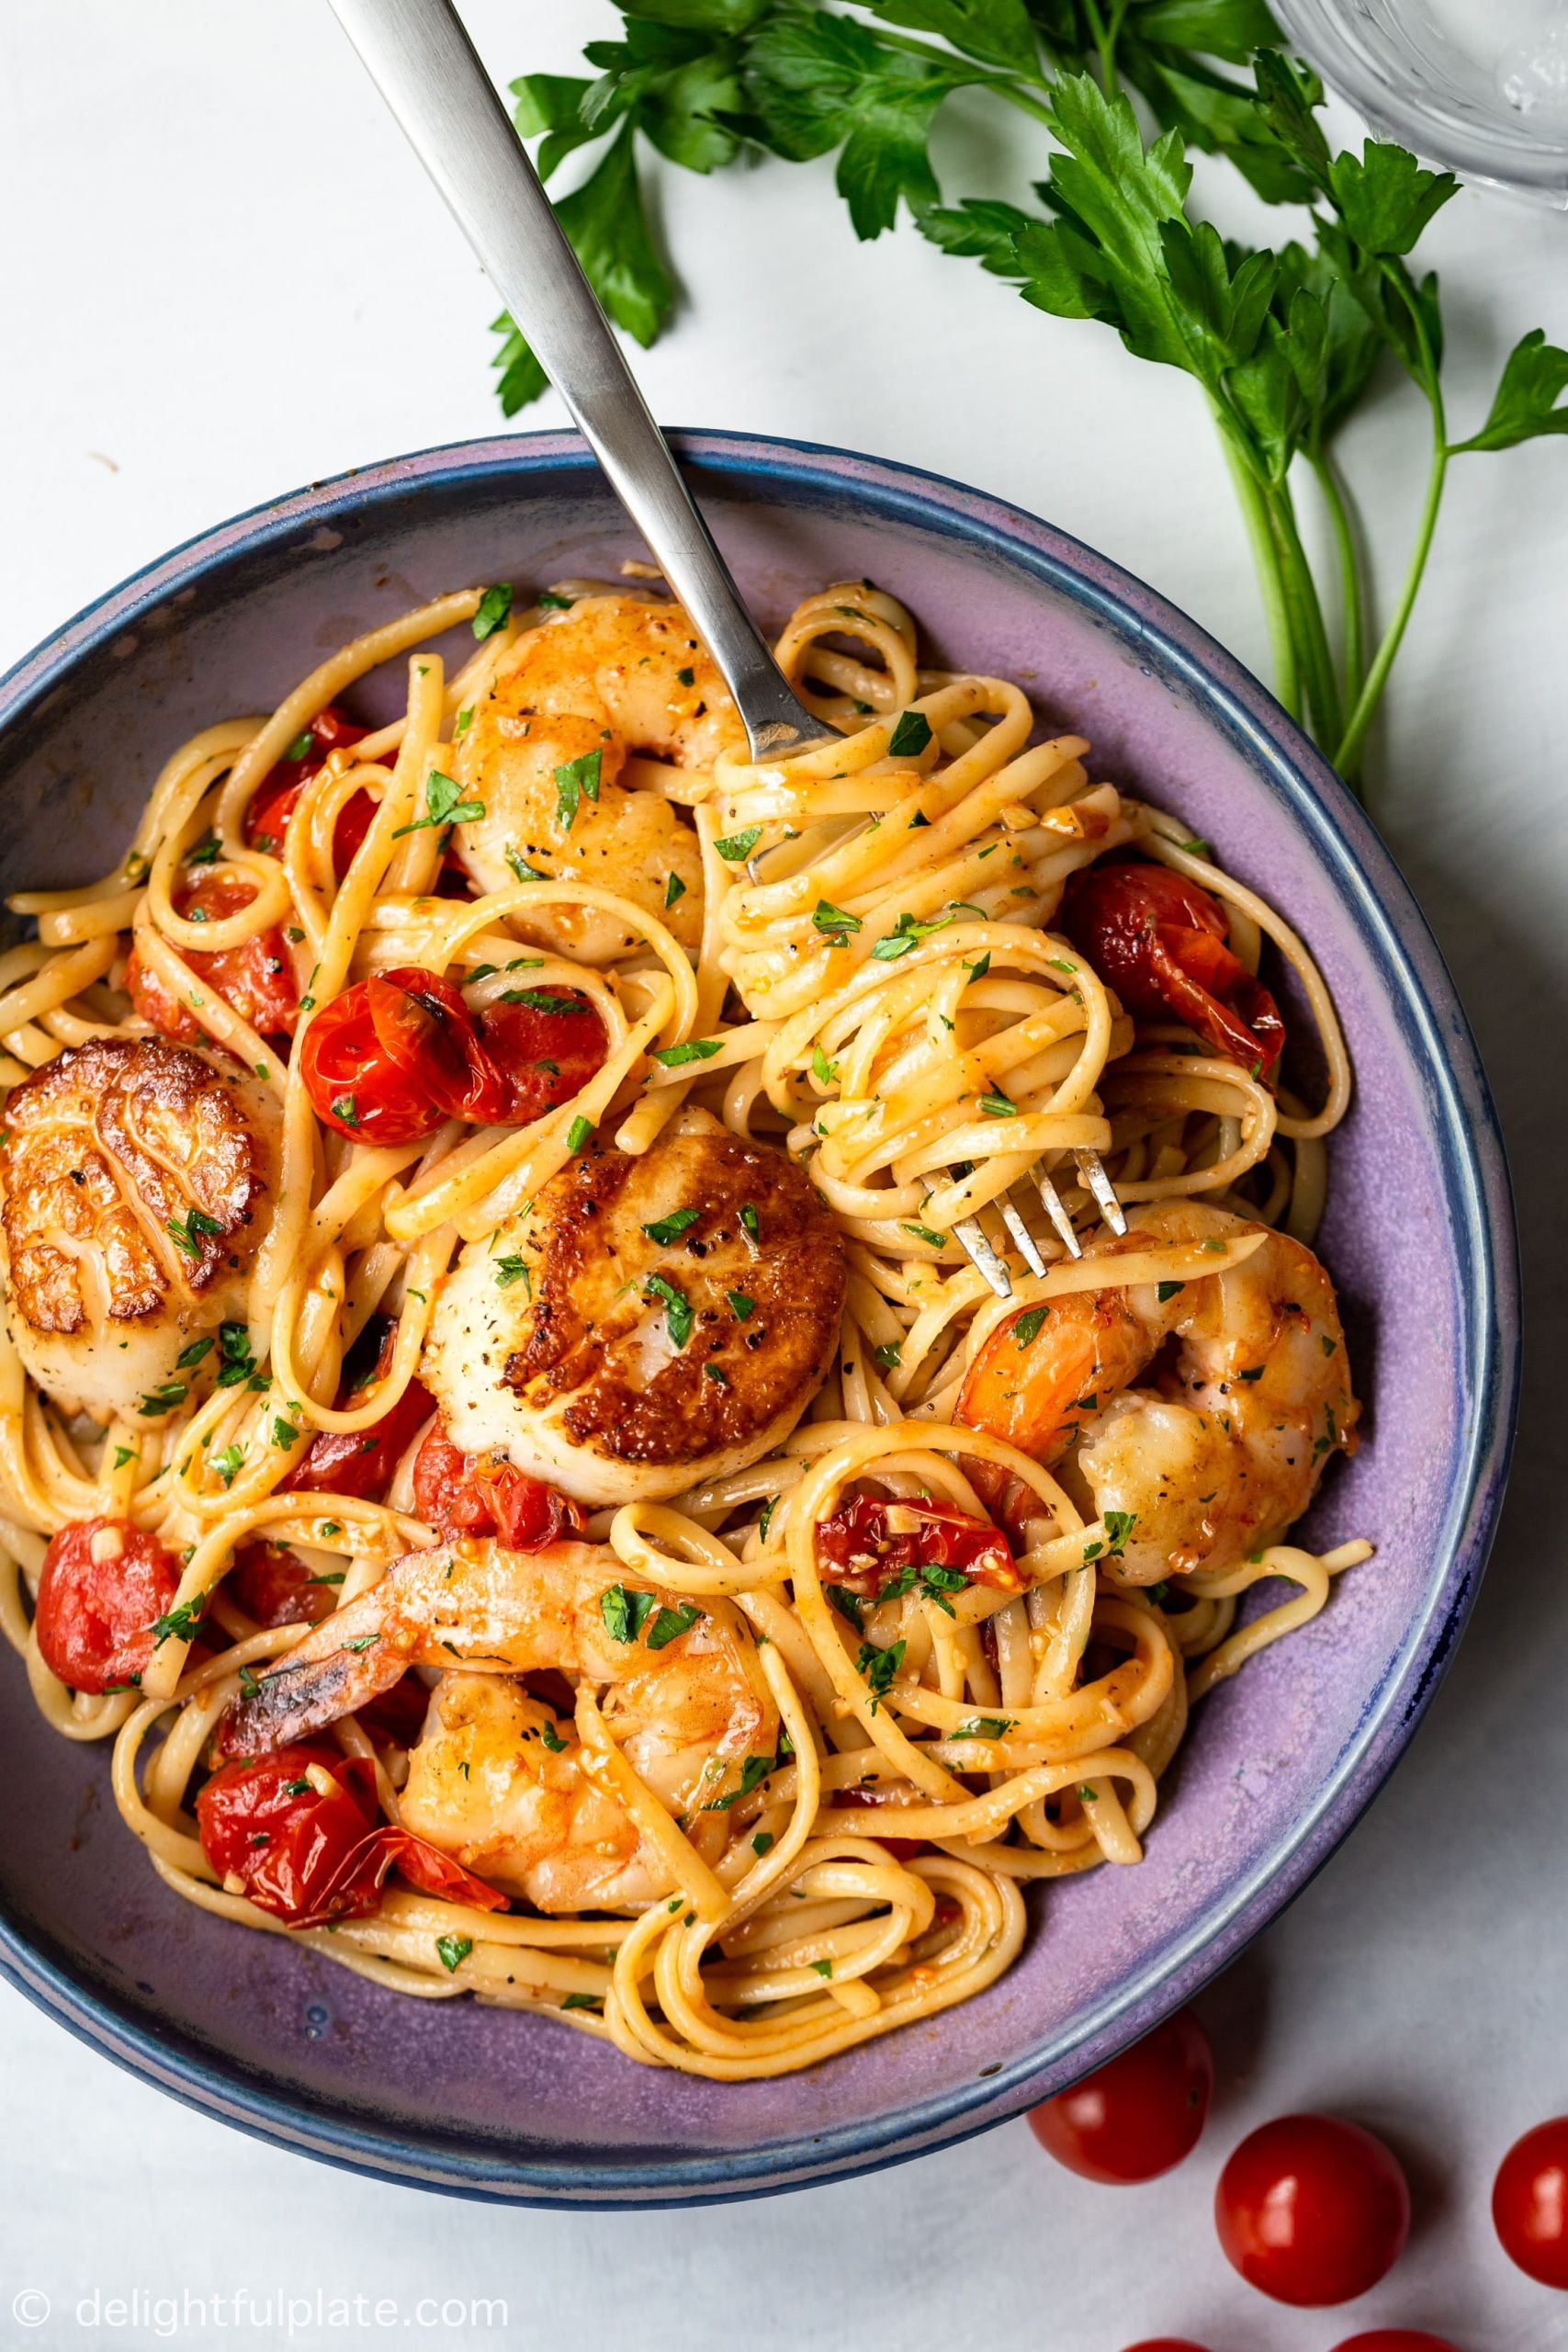 Scallop and Shrimp Pasta Lovely Scallop Shrimp Pasta with Burst Cherry tomatoes